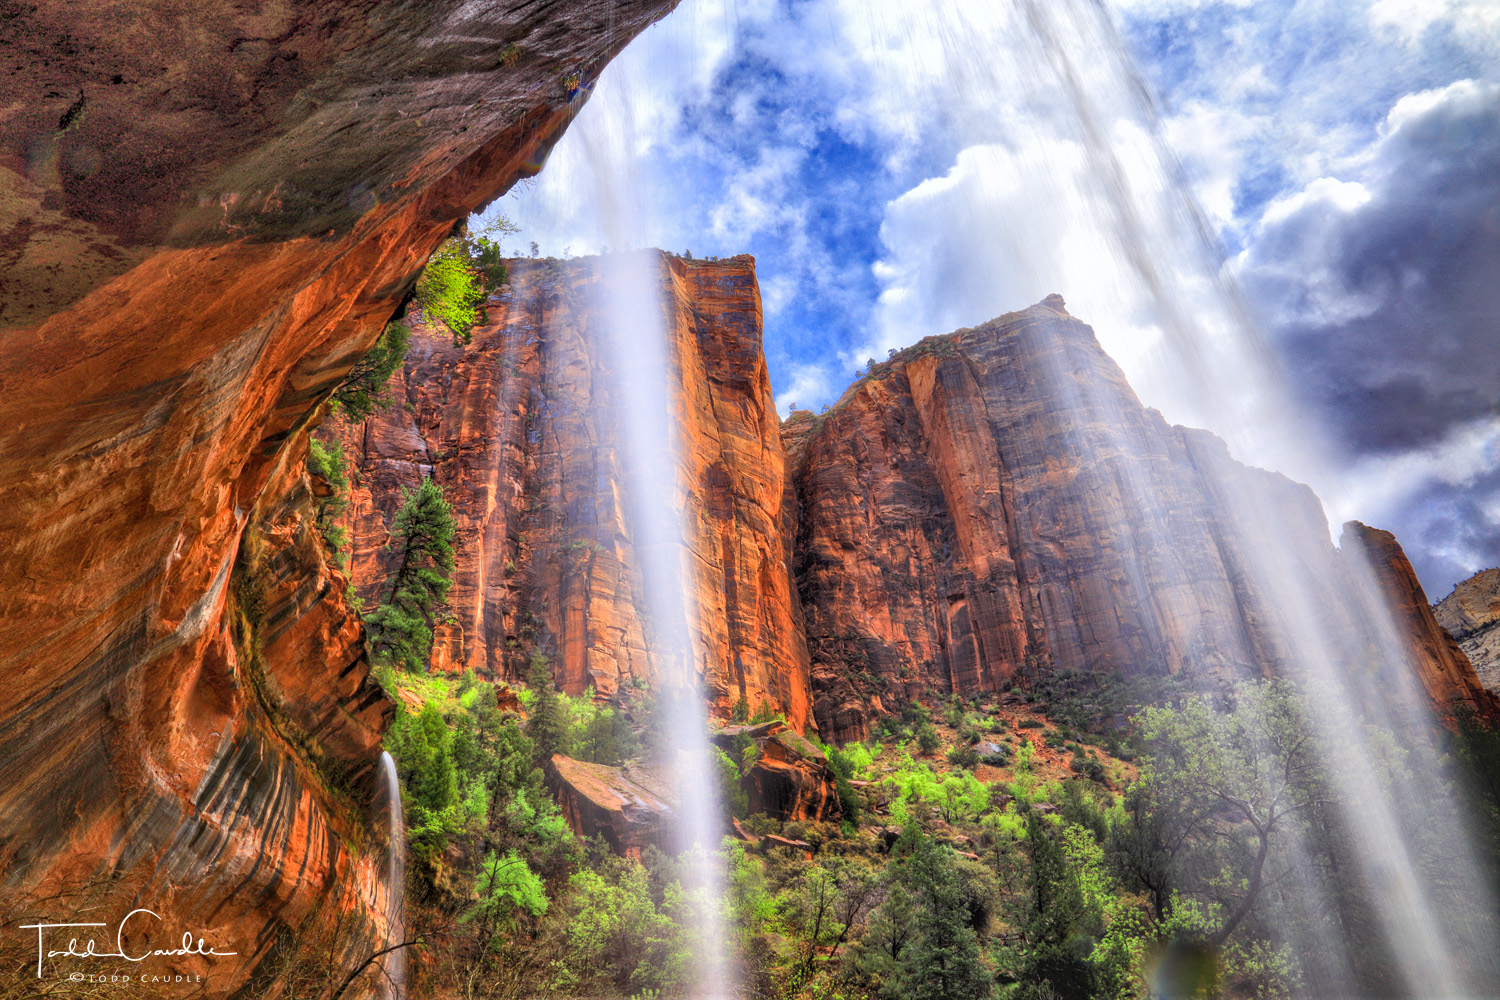 A rainy stretch of weather in April leads to pop-up waterfalls in Zion Canyon.